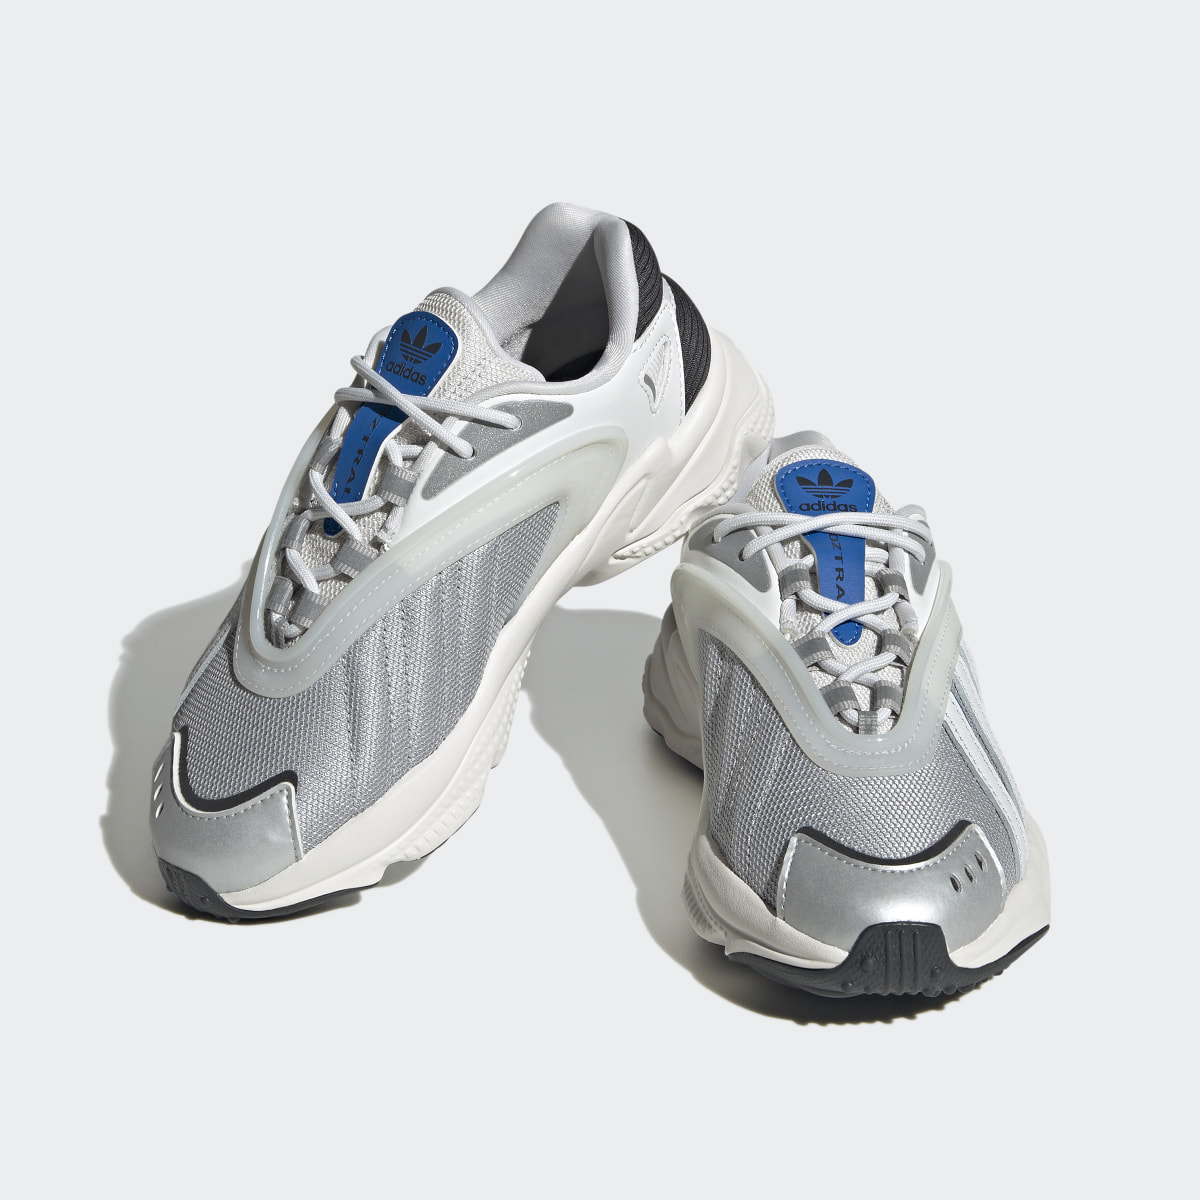 Adidas OZTRAL Shoes. 5